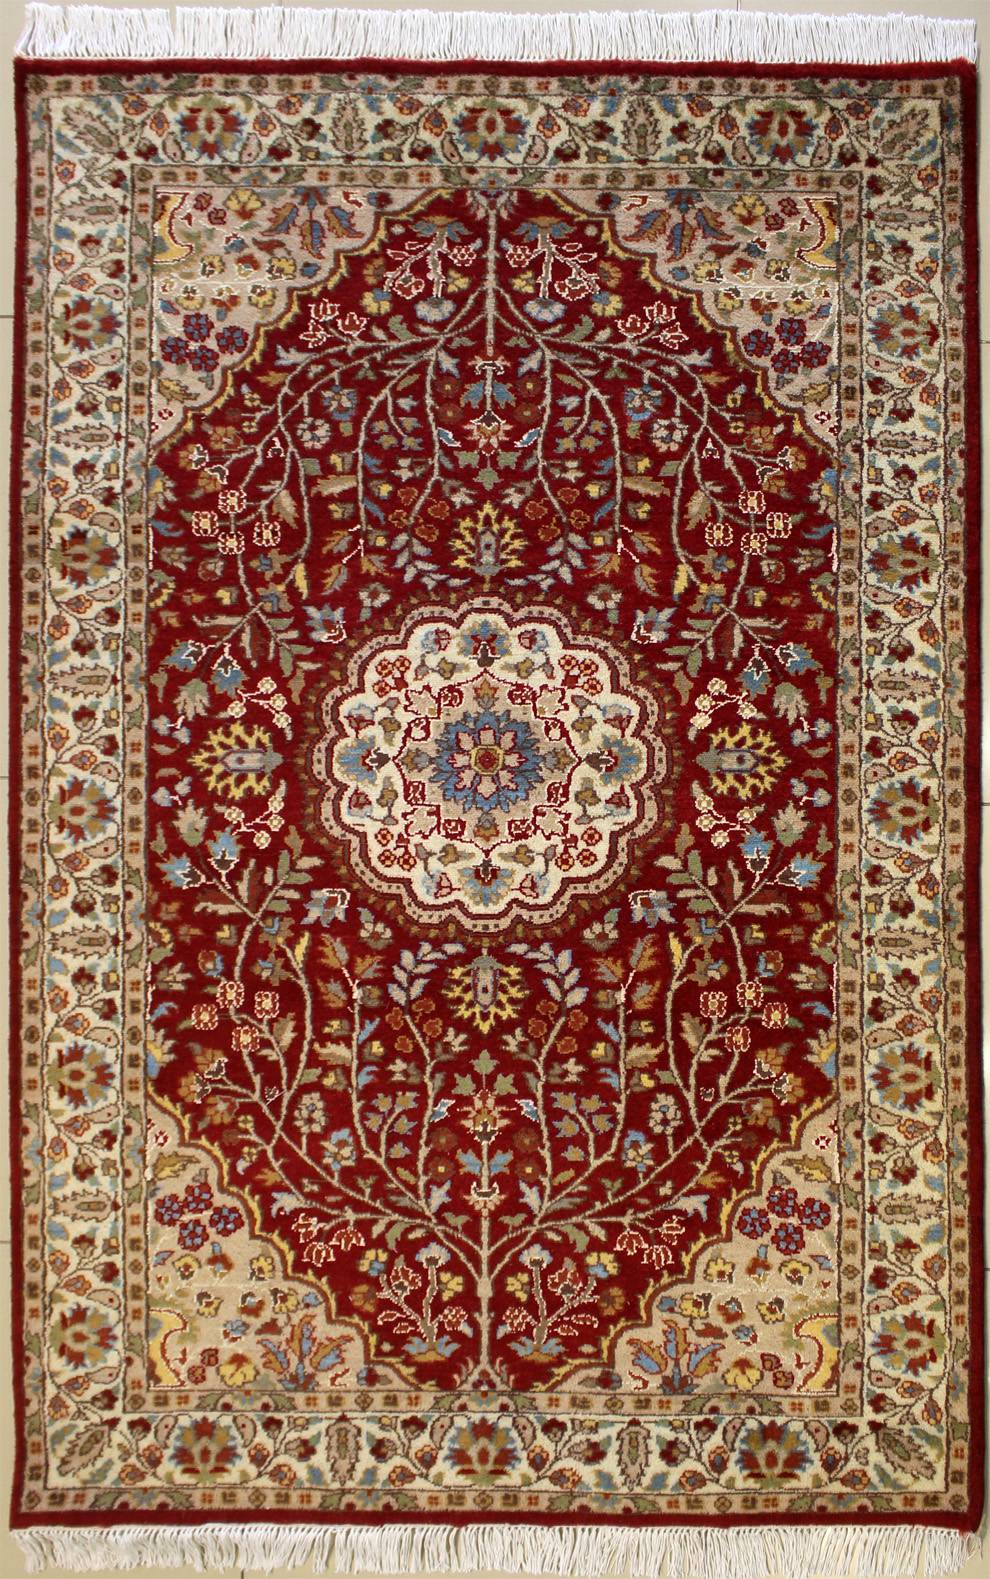 Floral Design a 4x6 Rectangular Double Knot Rug 100% Original Hand-Knotted in Gold,White,Green Colors RugsTC 4'0 x 6'4 Pak Persian Area Rug with Silk & Wool Pile 